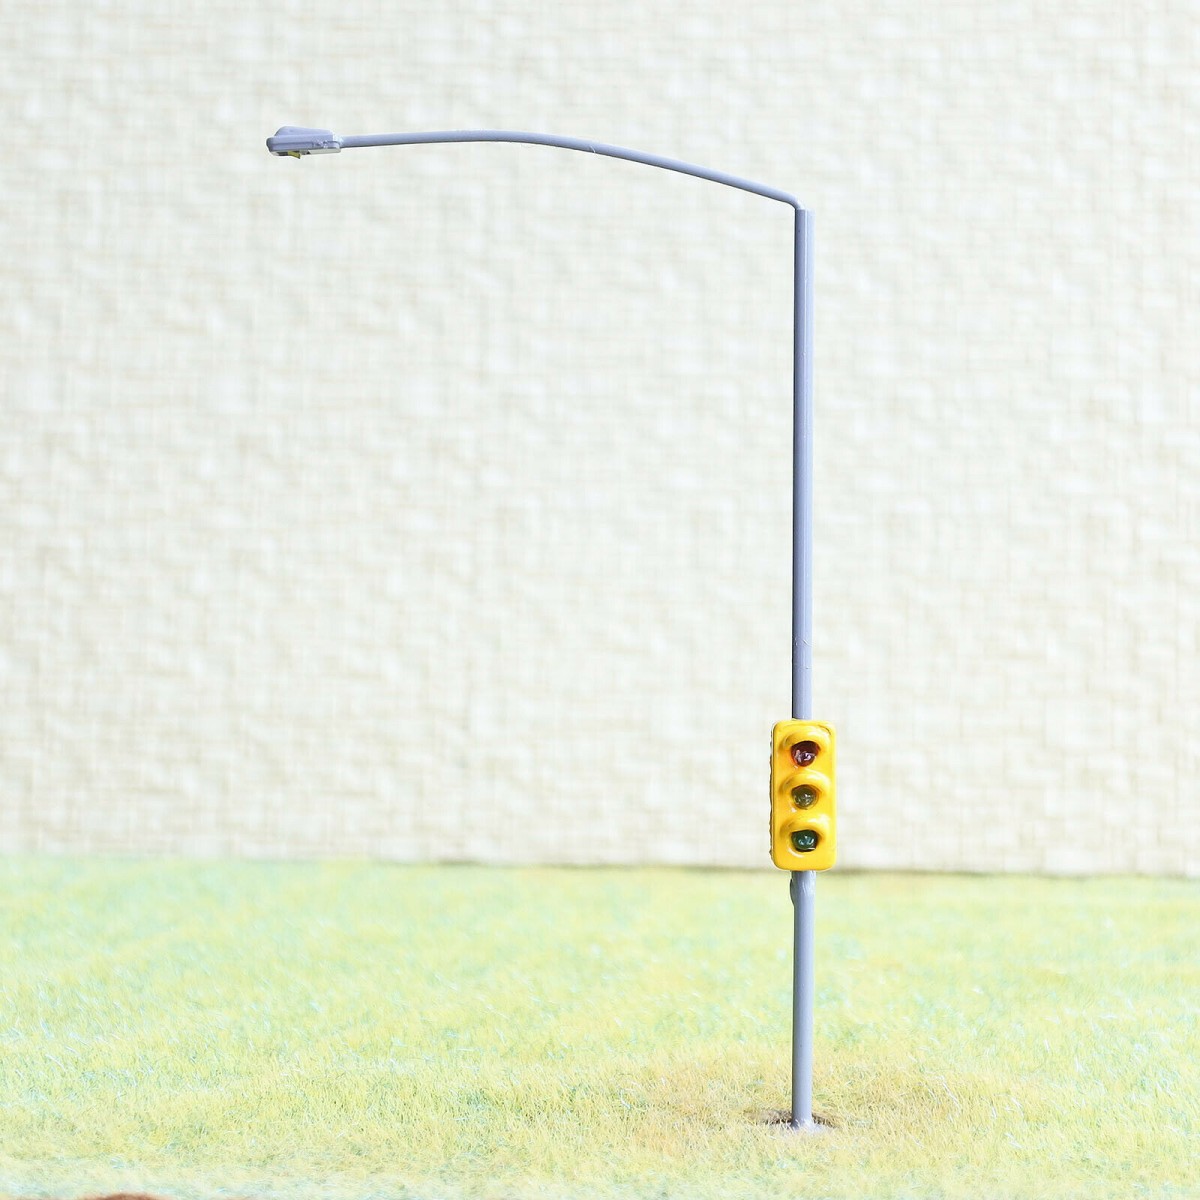 1 x traffic signal with street light HO OO scale model railroad led lamps #corGO